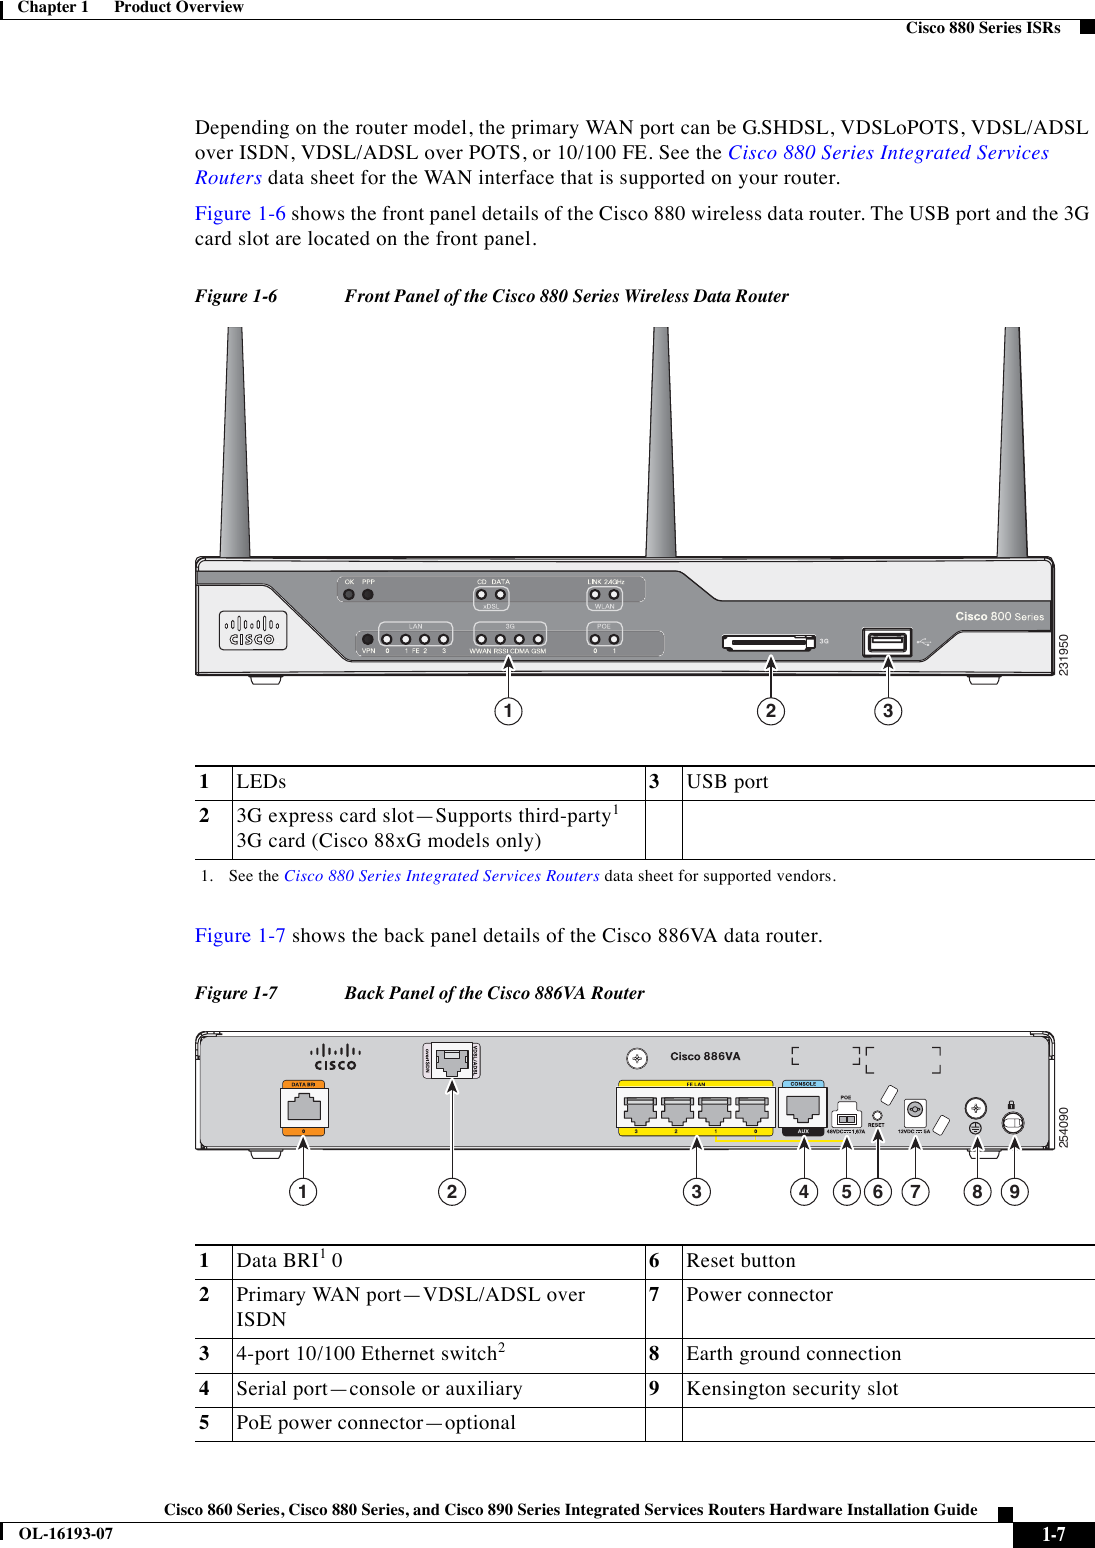  1-7Cisco 860 Series, Cisco 880 Series, and Cisco 890 Series Integrated Services Routers Hardware Installation GuideOL-16193-07Chapter 1      Product Overview  Cisco 880 Series ISRsDepending on the router model, the primary WAN port can be G.SHDSL, VDSLoPOTS, VDSL/ADSL over ISDN, VDSL/ADSL over POTS, or 10/100 FE. See the Cisco 880 Series Integrated Services Routers data sheet for the WAN interface that is supported on your router.Figure 1-6 shows the front panel details of the Cisco 880 wireless data router. The USB port and the 3G card slot are located on the front panel.Figure 1-6 Front Panel of the Cisco 880 Series Wireless Data RouterFigure 1-7 shows the back panel details of the Cisco 886VA data router.Figure 1-7 Back Panel of the Cisco 886VA Router1LEDs 3USB port23G express card slot—Supports third-party1 3G card (Cisco 88xG models only)1. See the Cisco 880 Series Integrated Services Routers data sheet for supported vendors.2319501 2 32540901 3 4 5 7 8 9621Data BRI1 0 6Reset button2Primary WAN port—VDSL/ADSL over ISDN7Power connector34-port 10/100 Ethernet switch28Earth ground connection4Serial port—console or auxiliary 9Kensington security slot5PoE power connector—optional